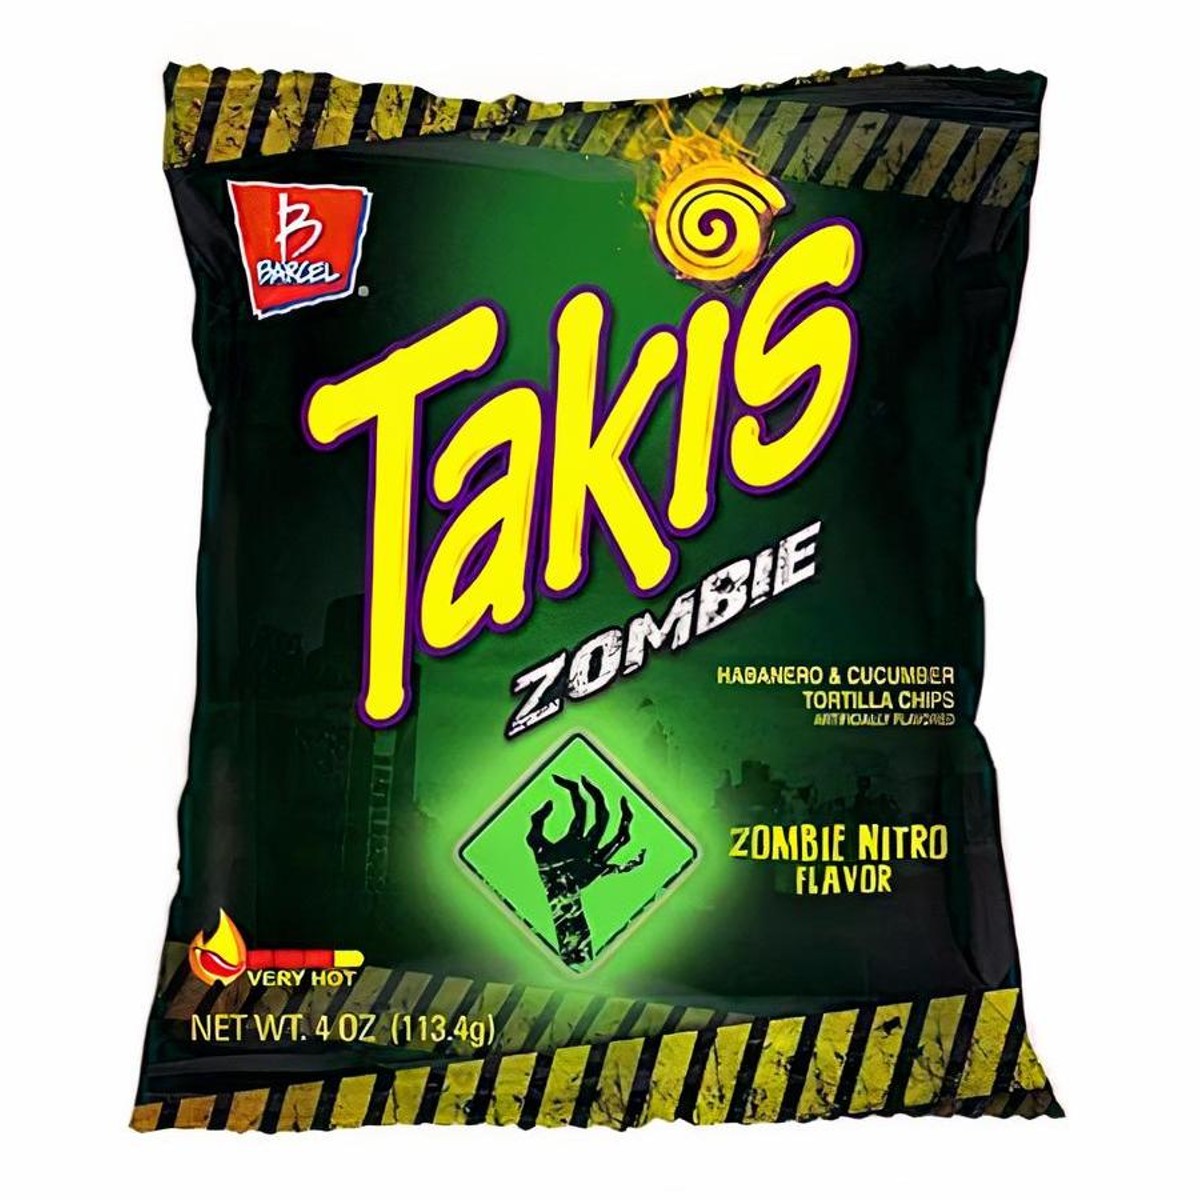 REVIEW: Barcel – Takis BBQ Picante